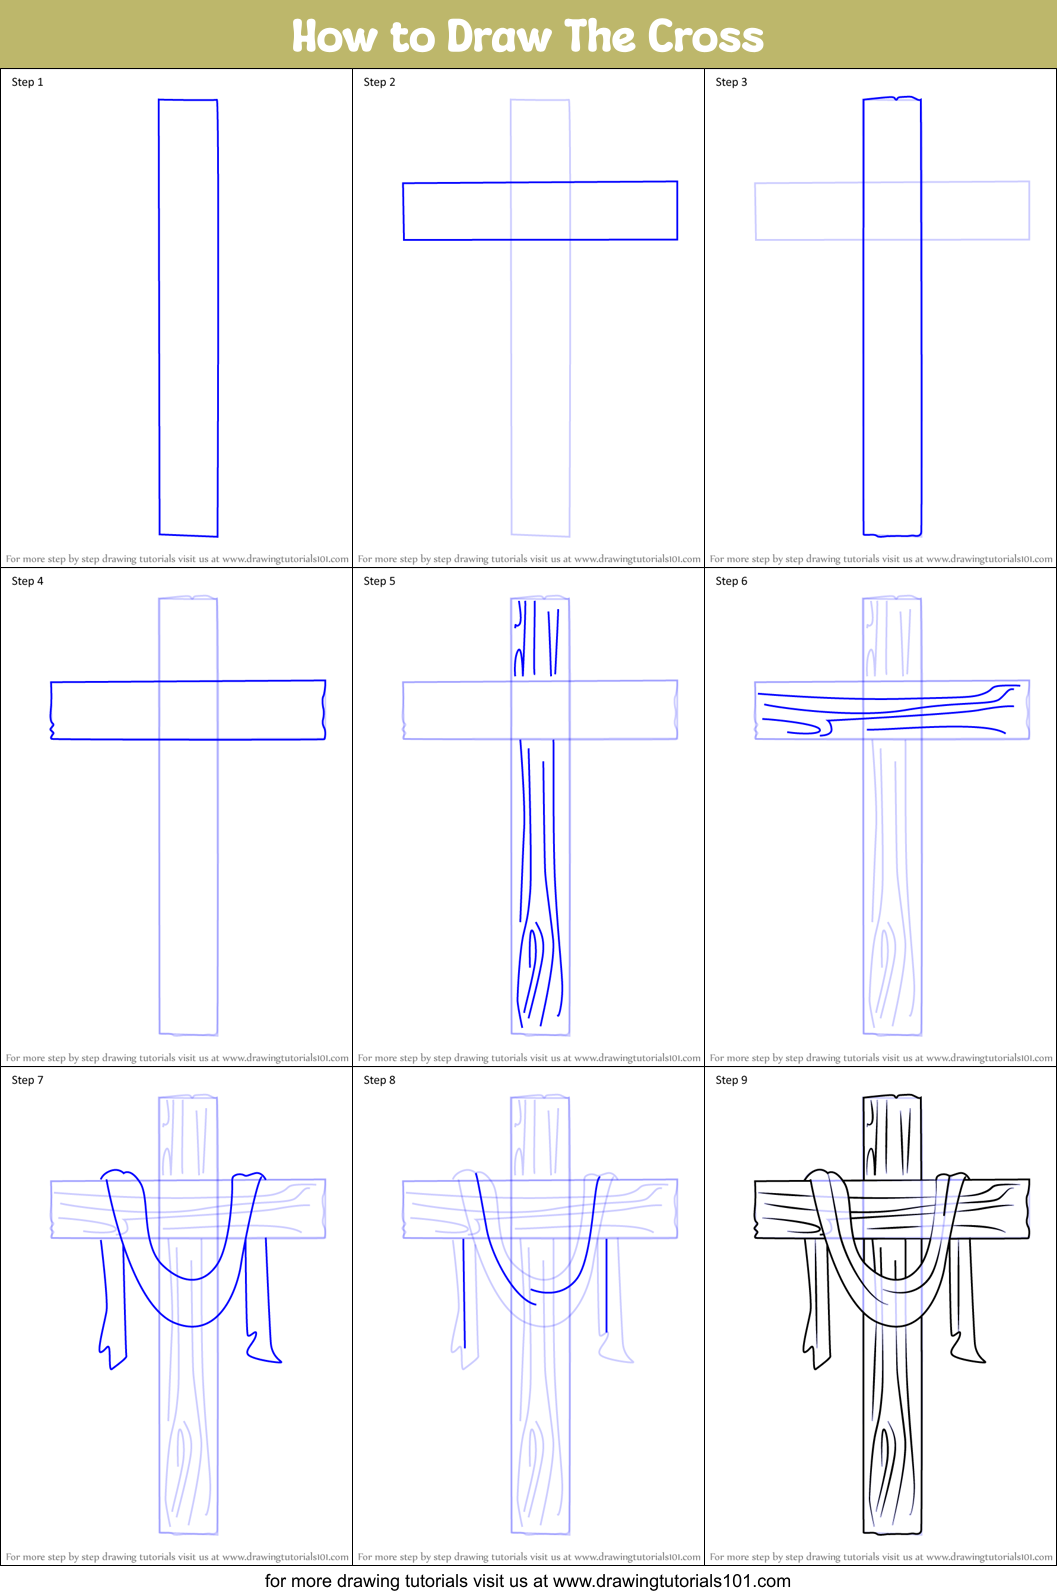 How to Draw The Cross printable step by step drawing sheet